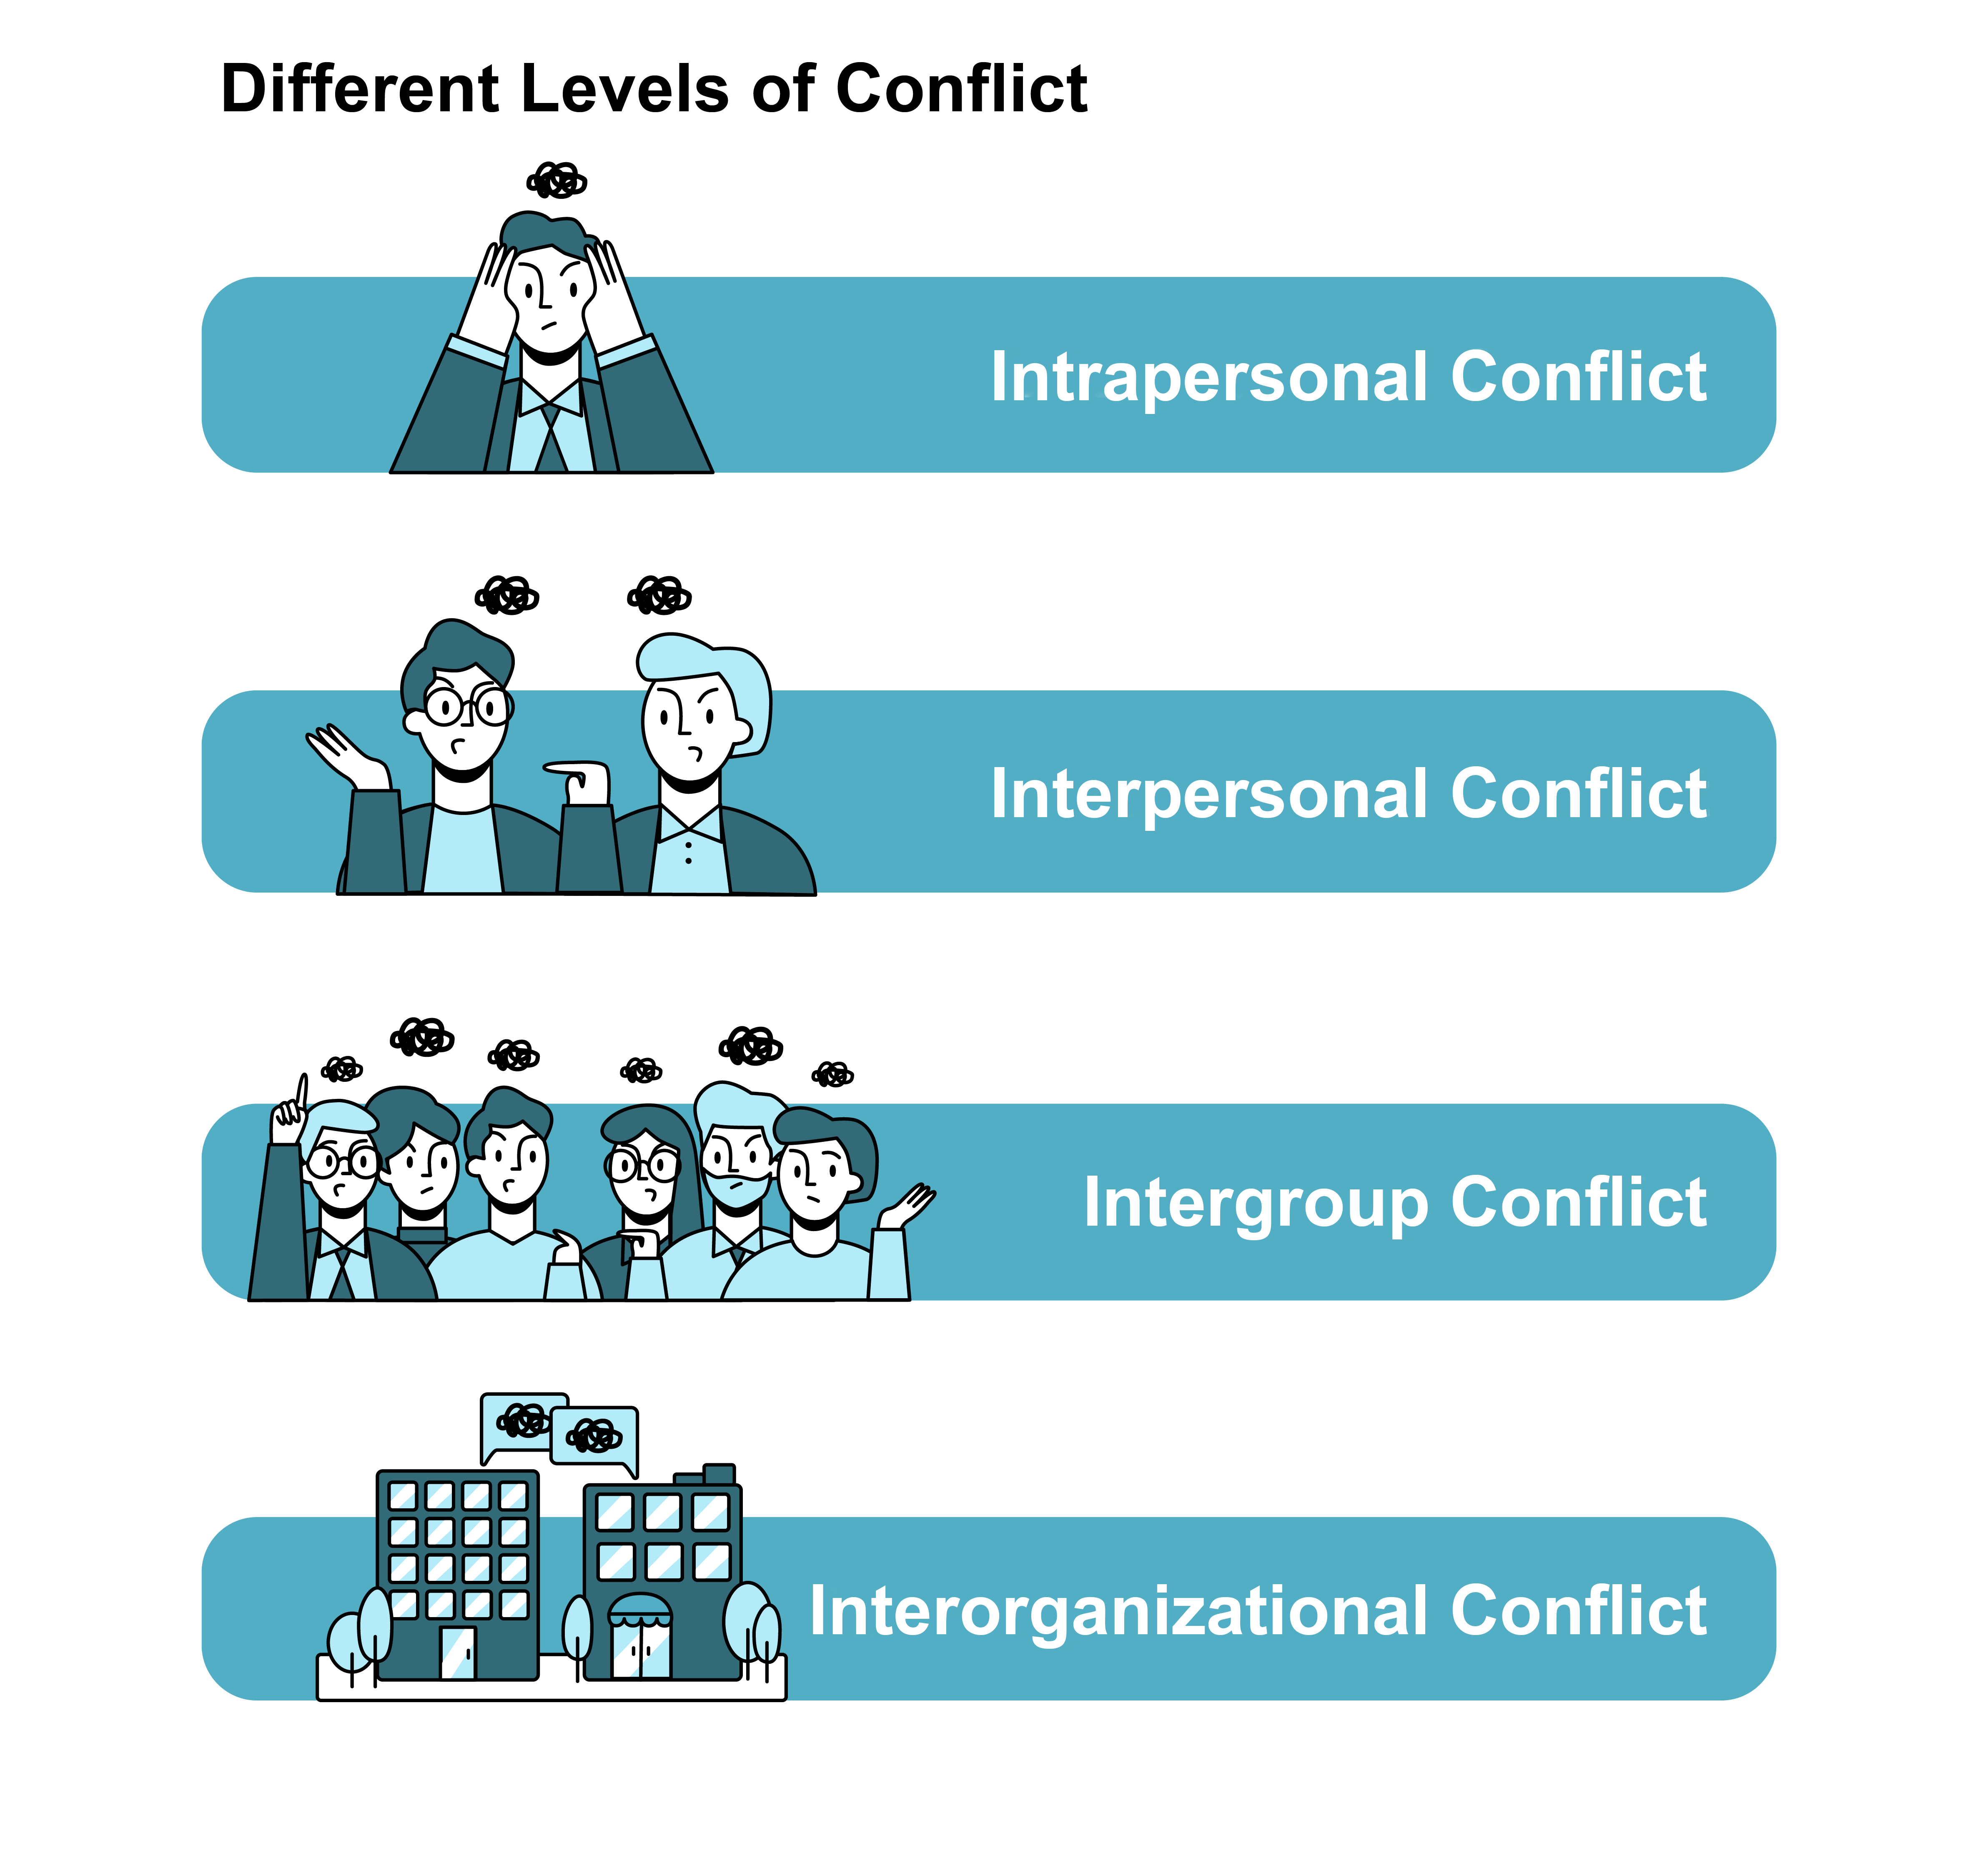 Different Levels of Conflict